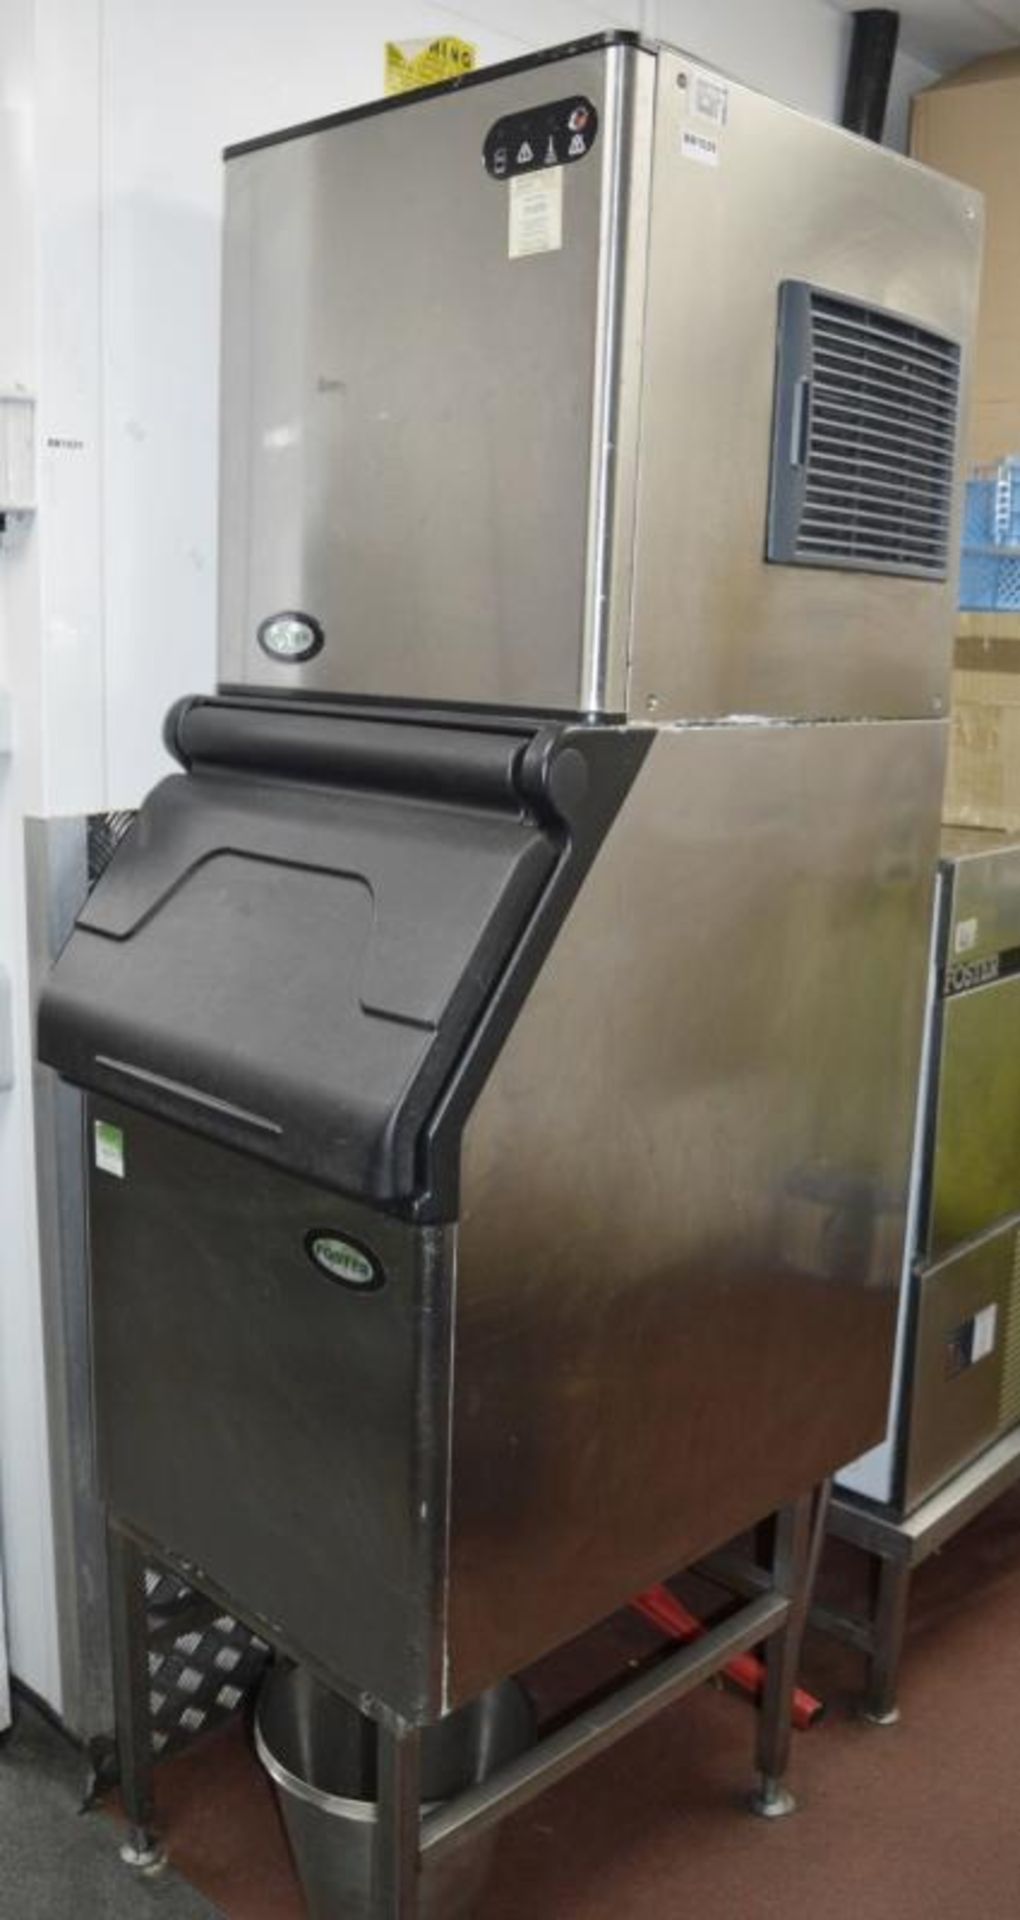 1 x Foster Modular Air-Cooled Ice Cube Maker - Model F132 With SB105 Bin - 130kg Output and 100kg St - Image 6 of 10